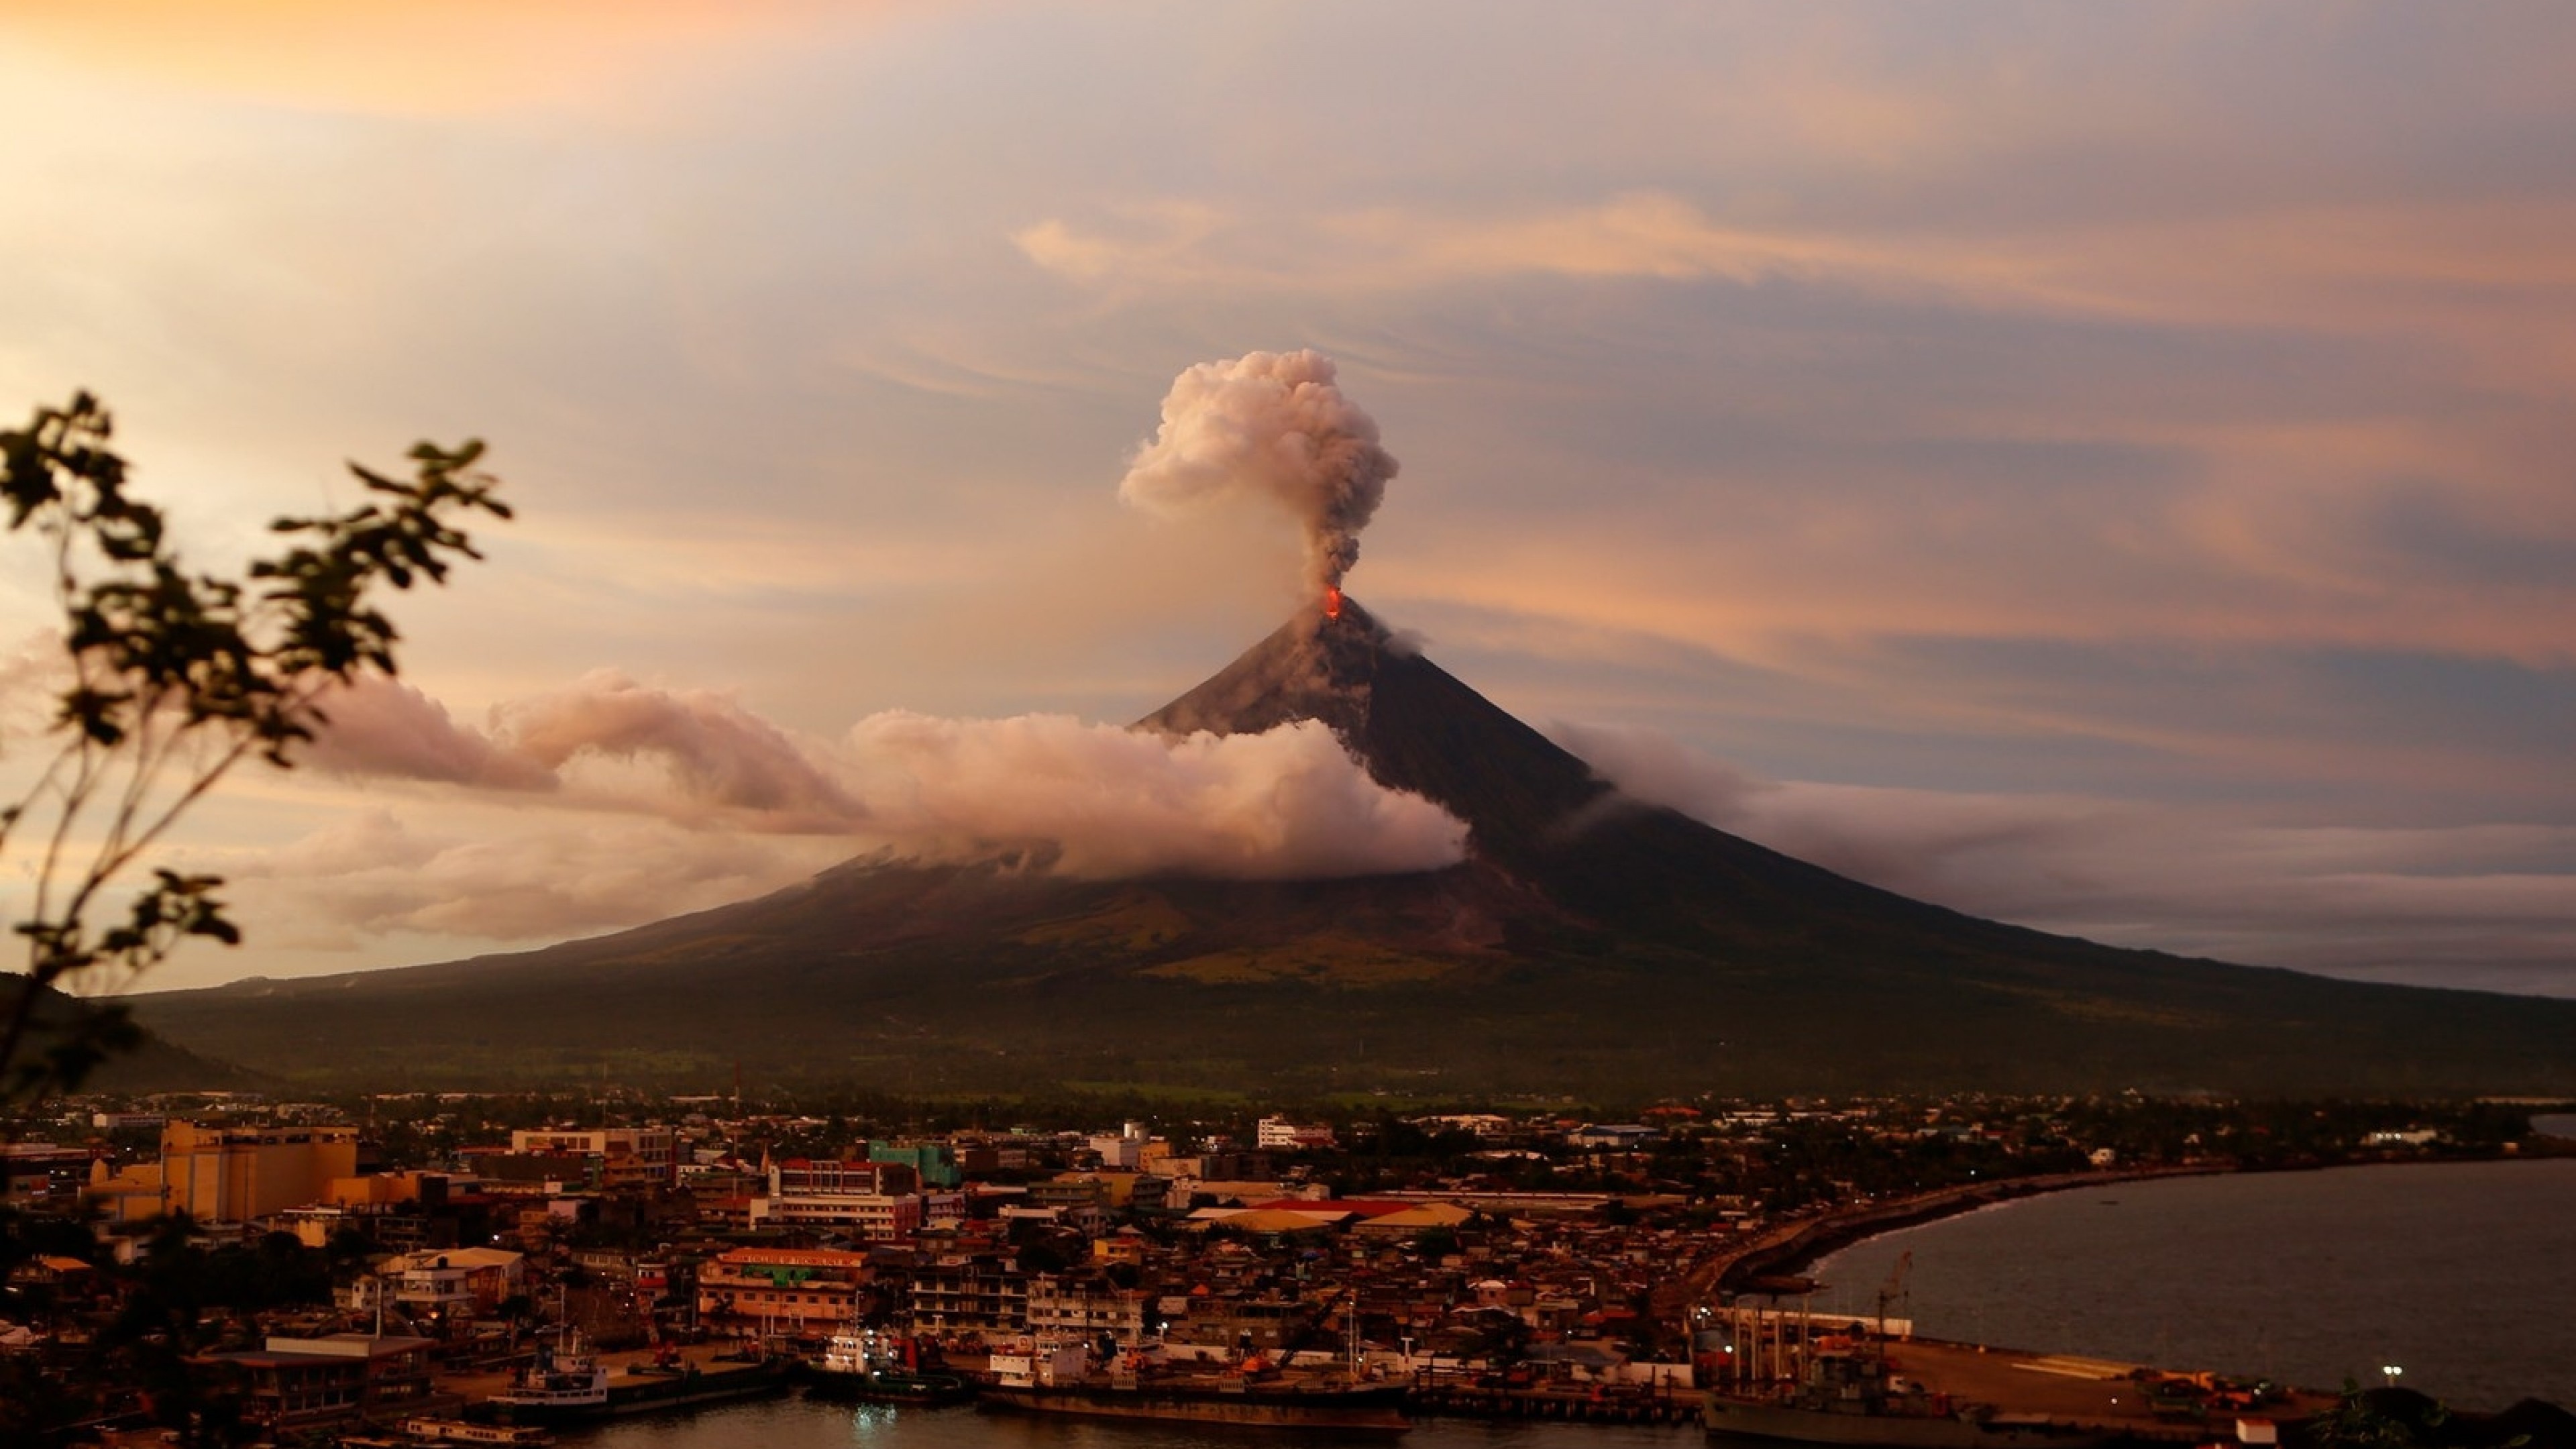 Philippines, Volcano, Eruption, Sky, Clouds - Mayon Volcano Eruption 2019 , HD Wallpaper & Backgrounds